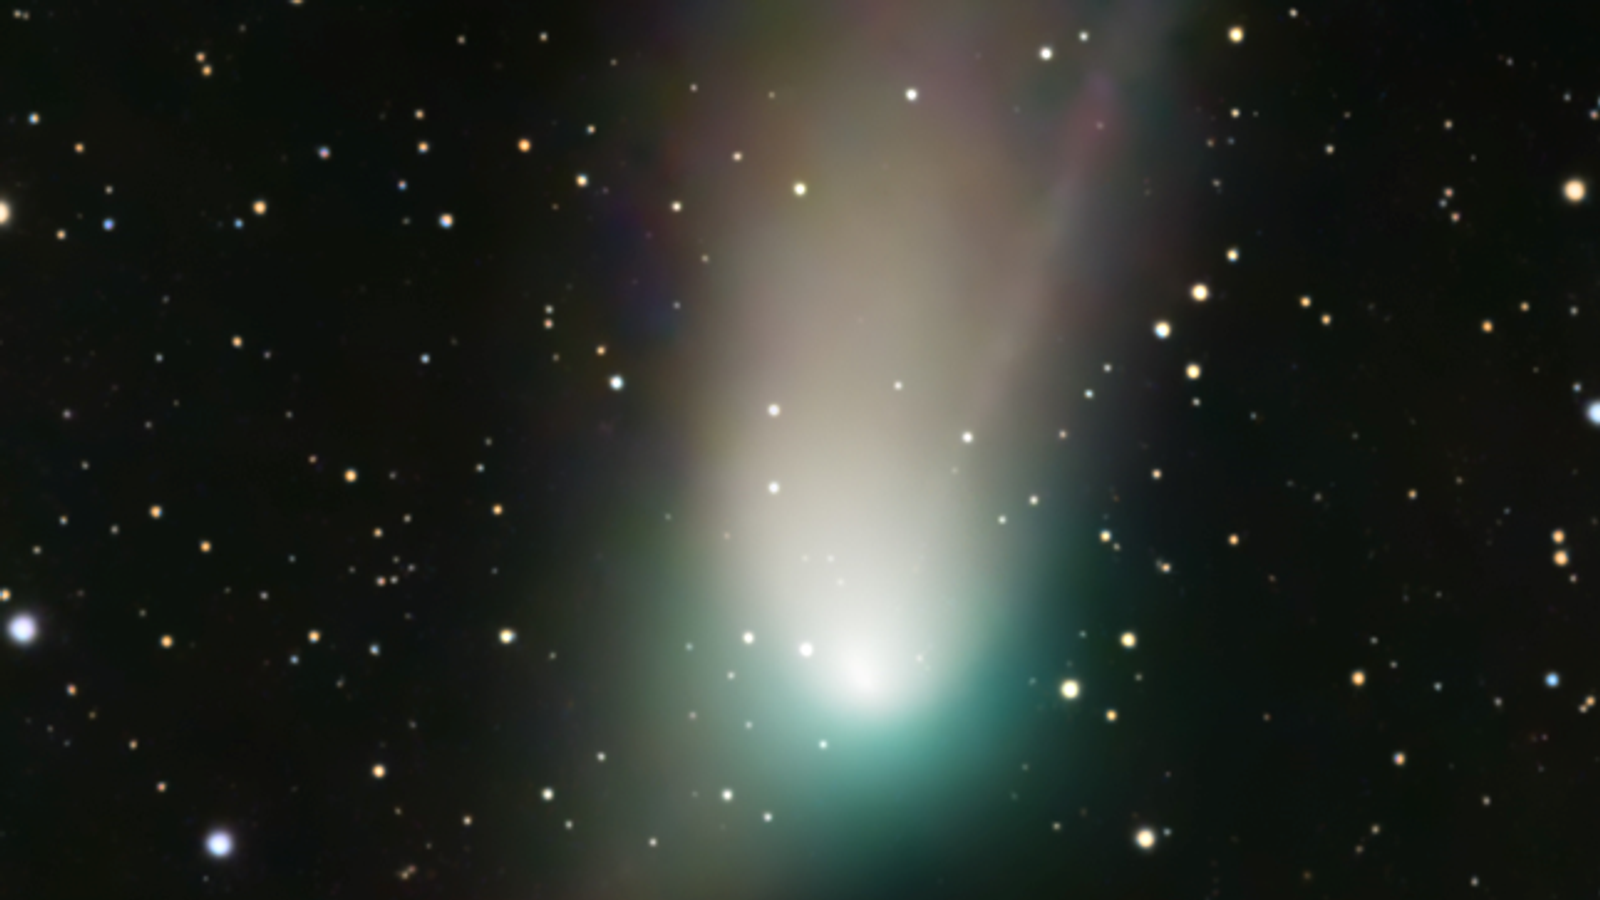 It's your best chance to spot a once-in-a-lifetime green comet - here's how